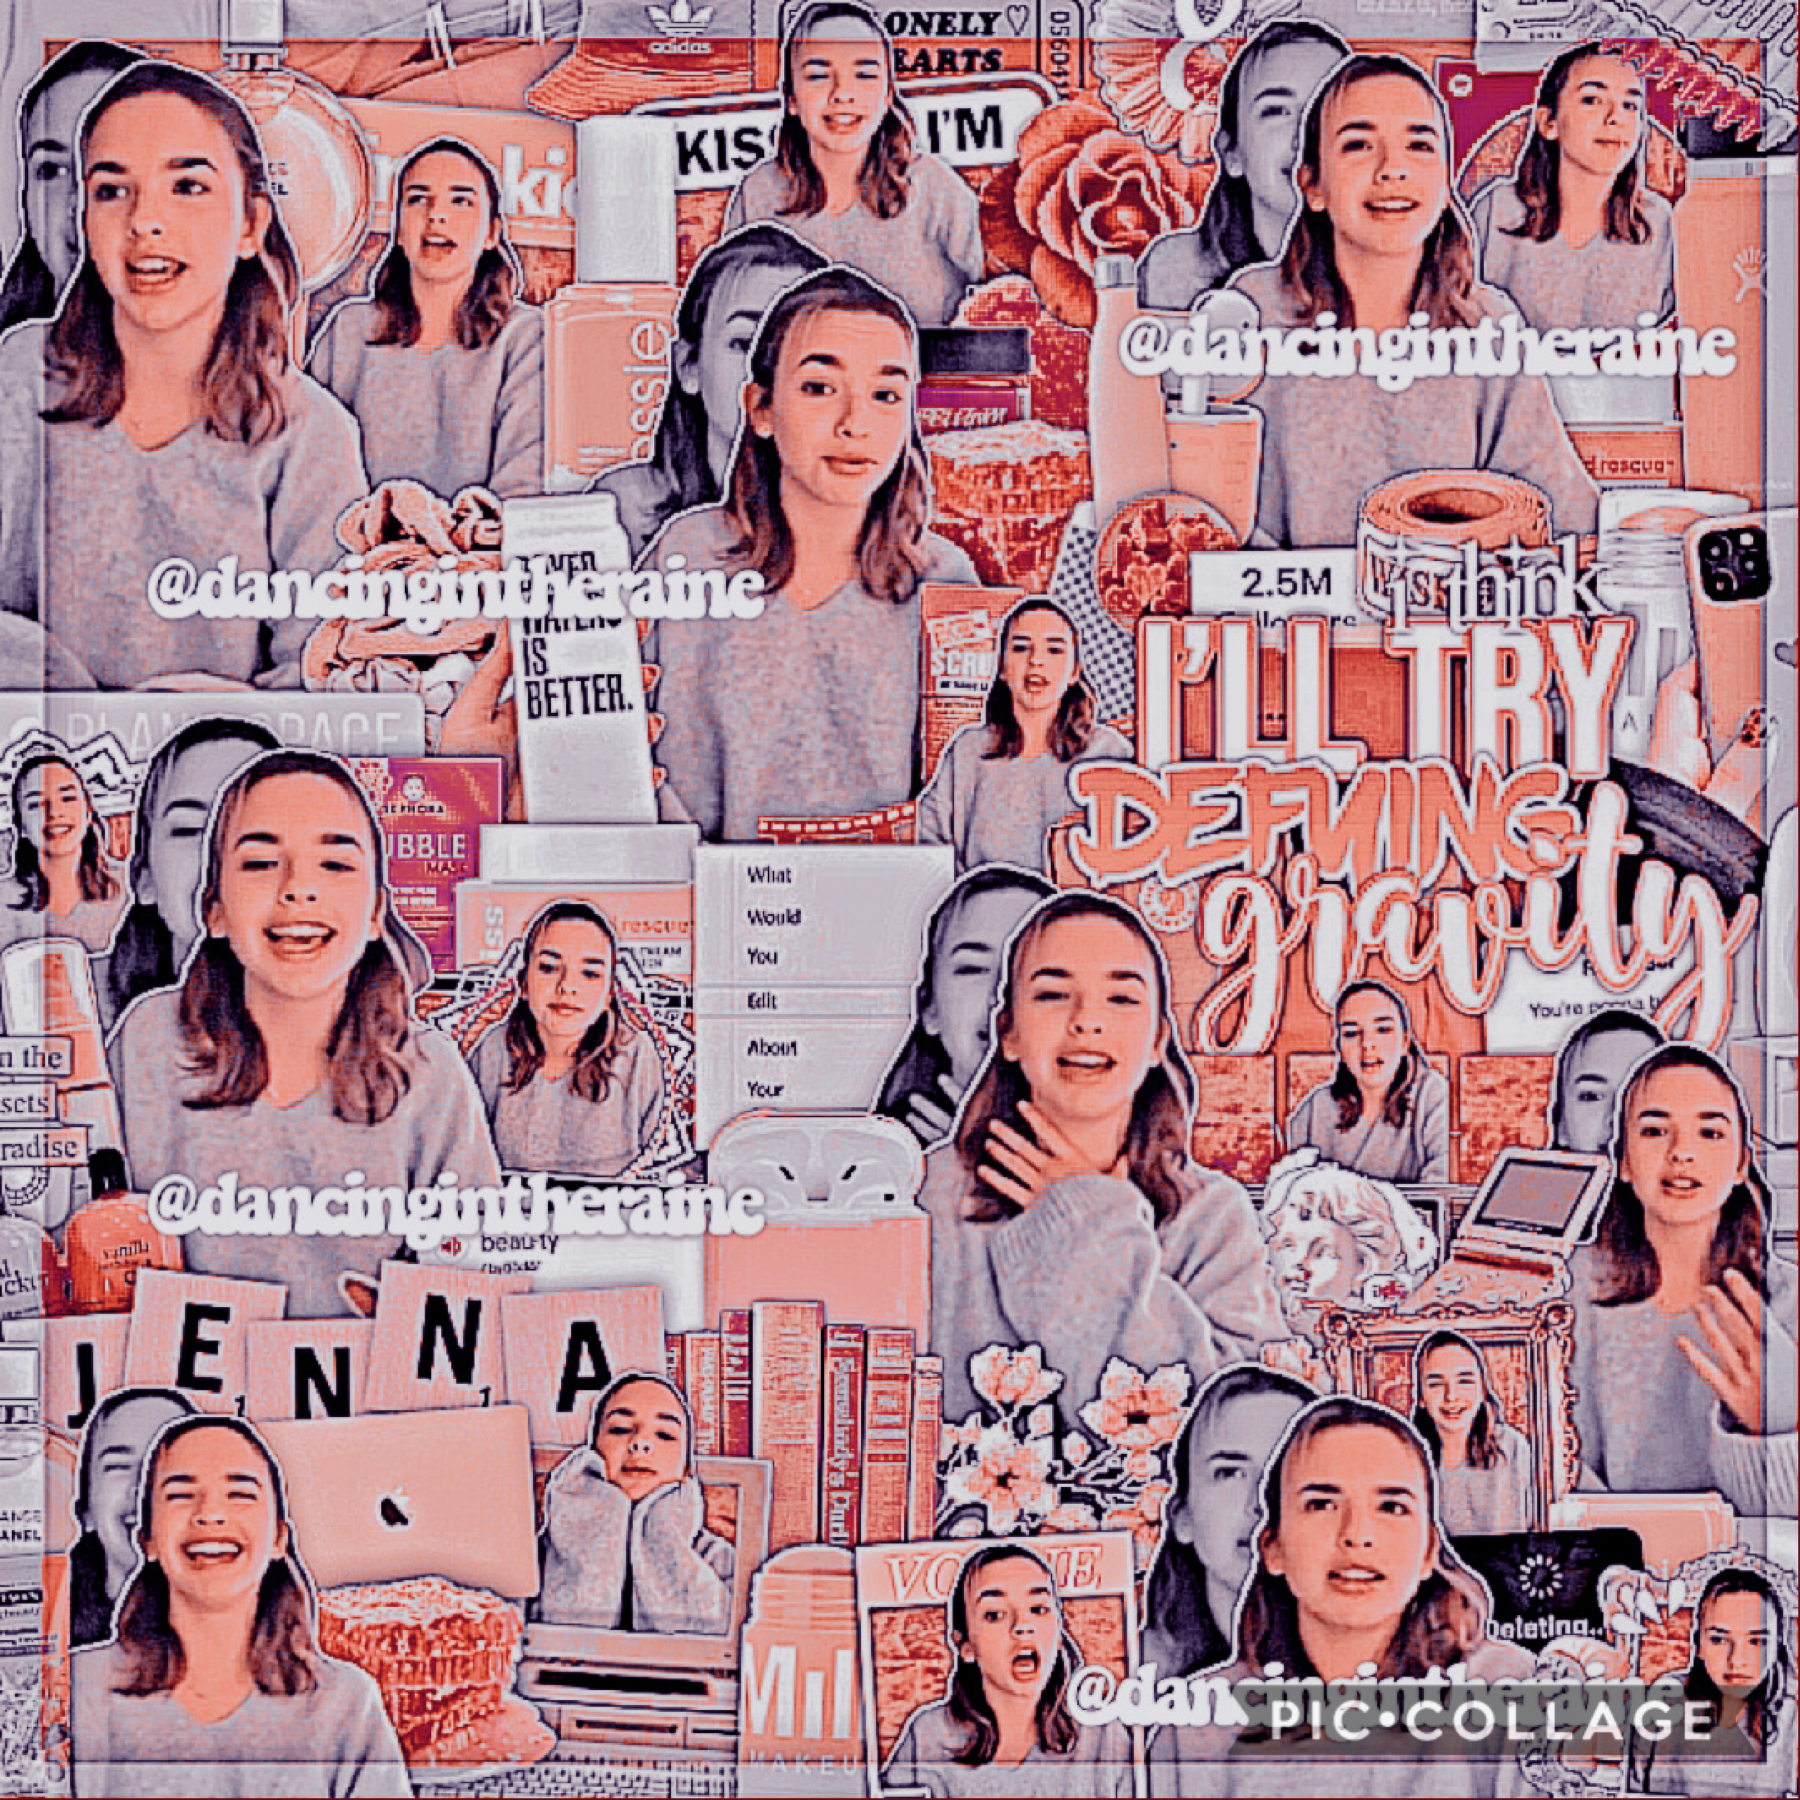 new COMPLEX edit (tap)

Info: Jenna Raine!!


Check me out on PicsArt!

@dancingintheraine for complex edits

&

@raineyxday for outline and blend edits


—————————————————————————